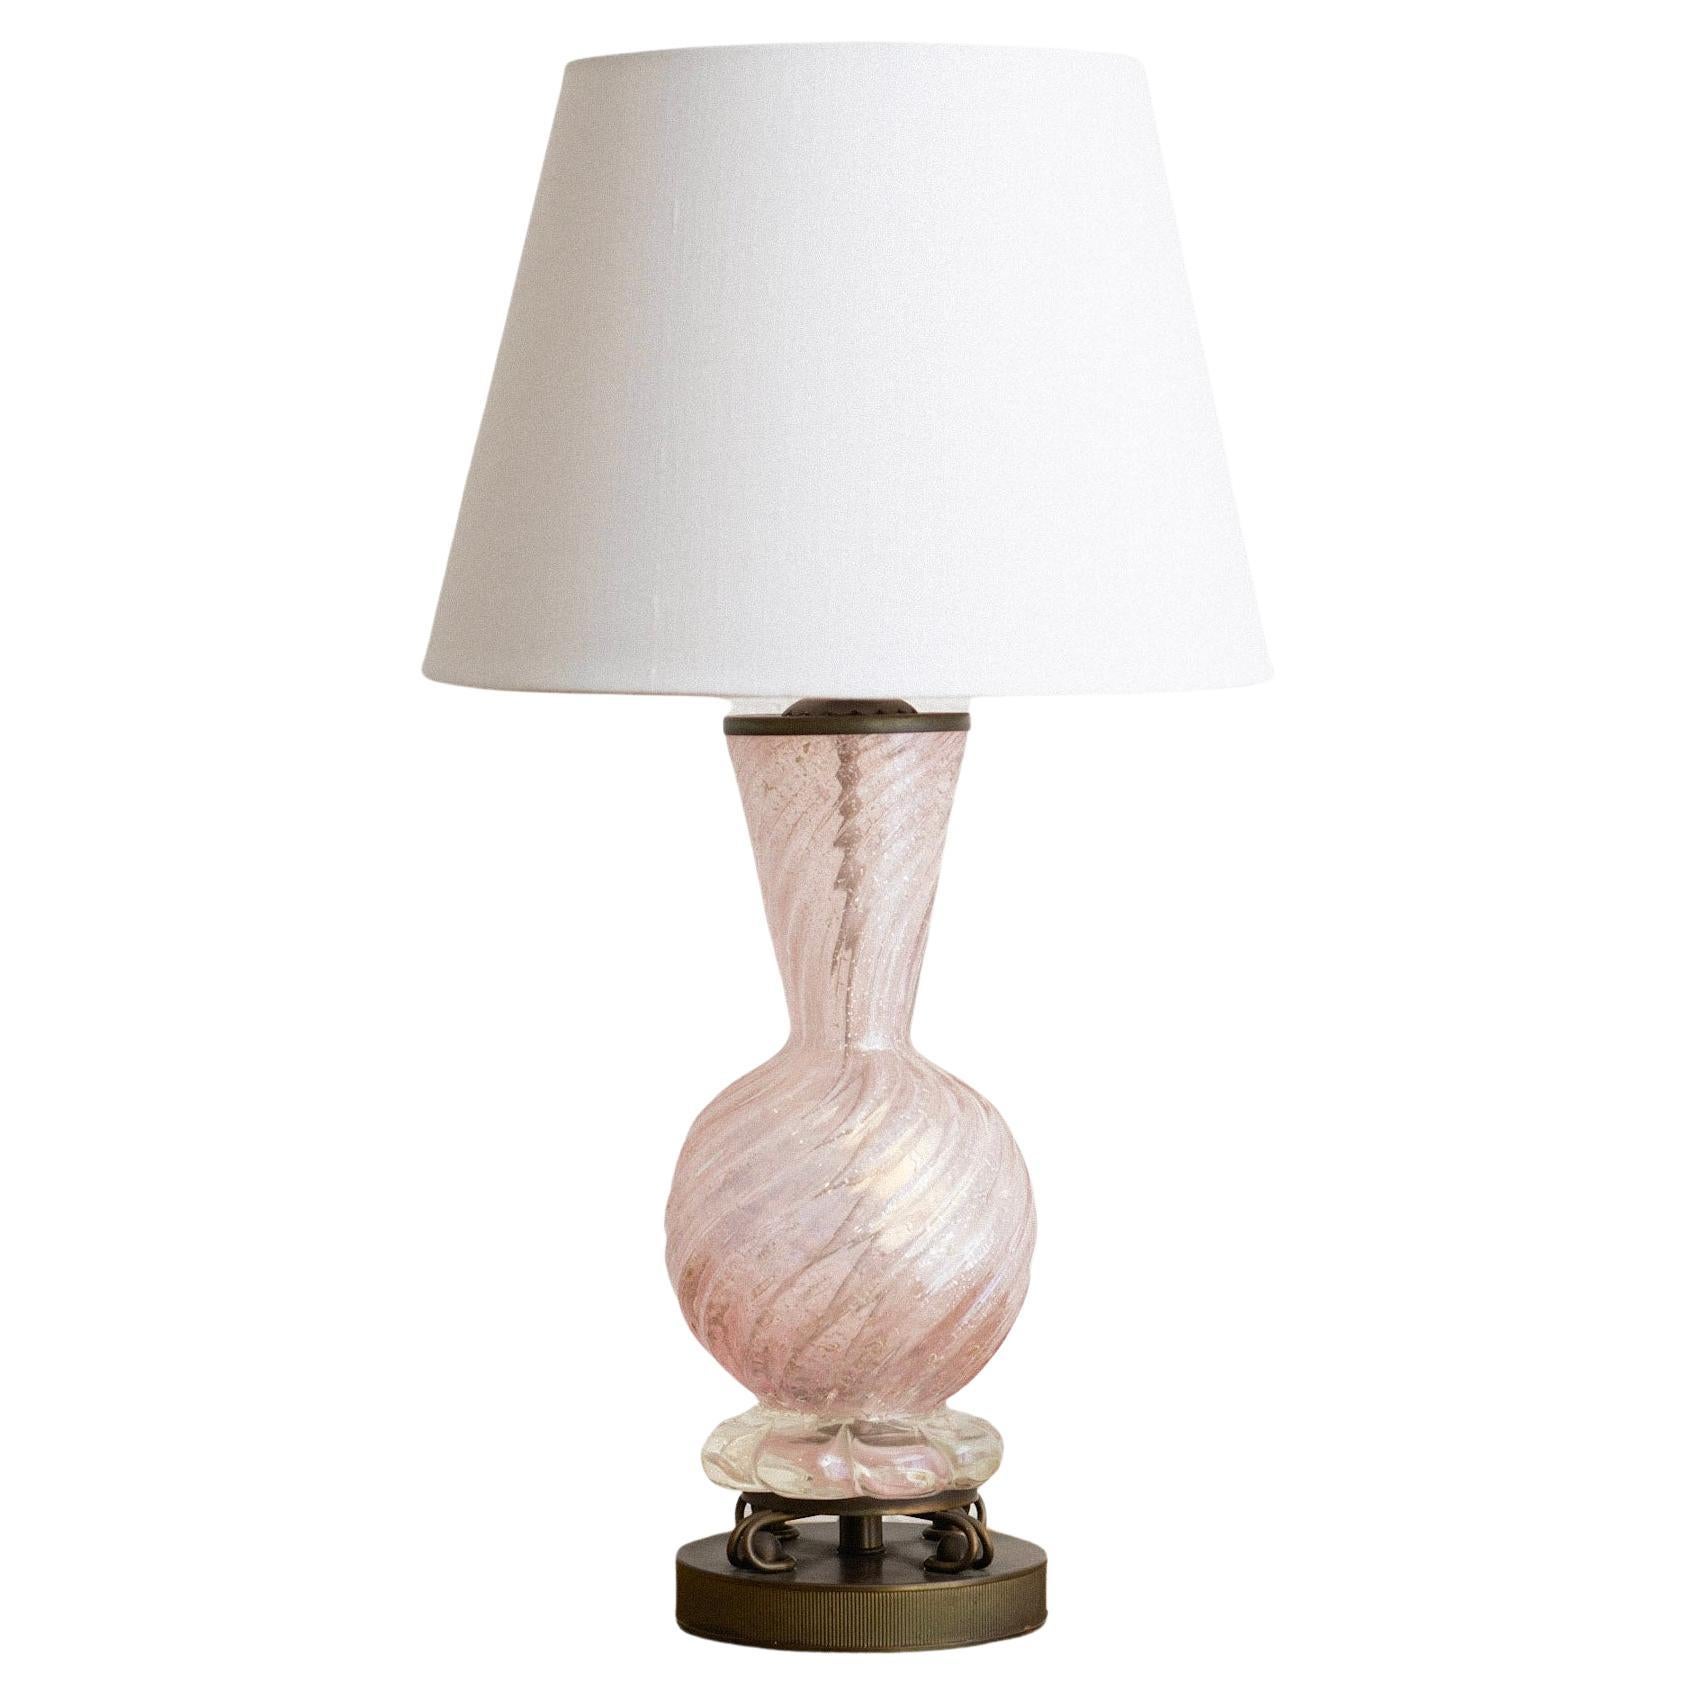 Midcentury Barovier & Toso Murano Glass Lamp For Sale